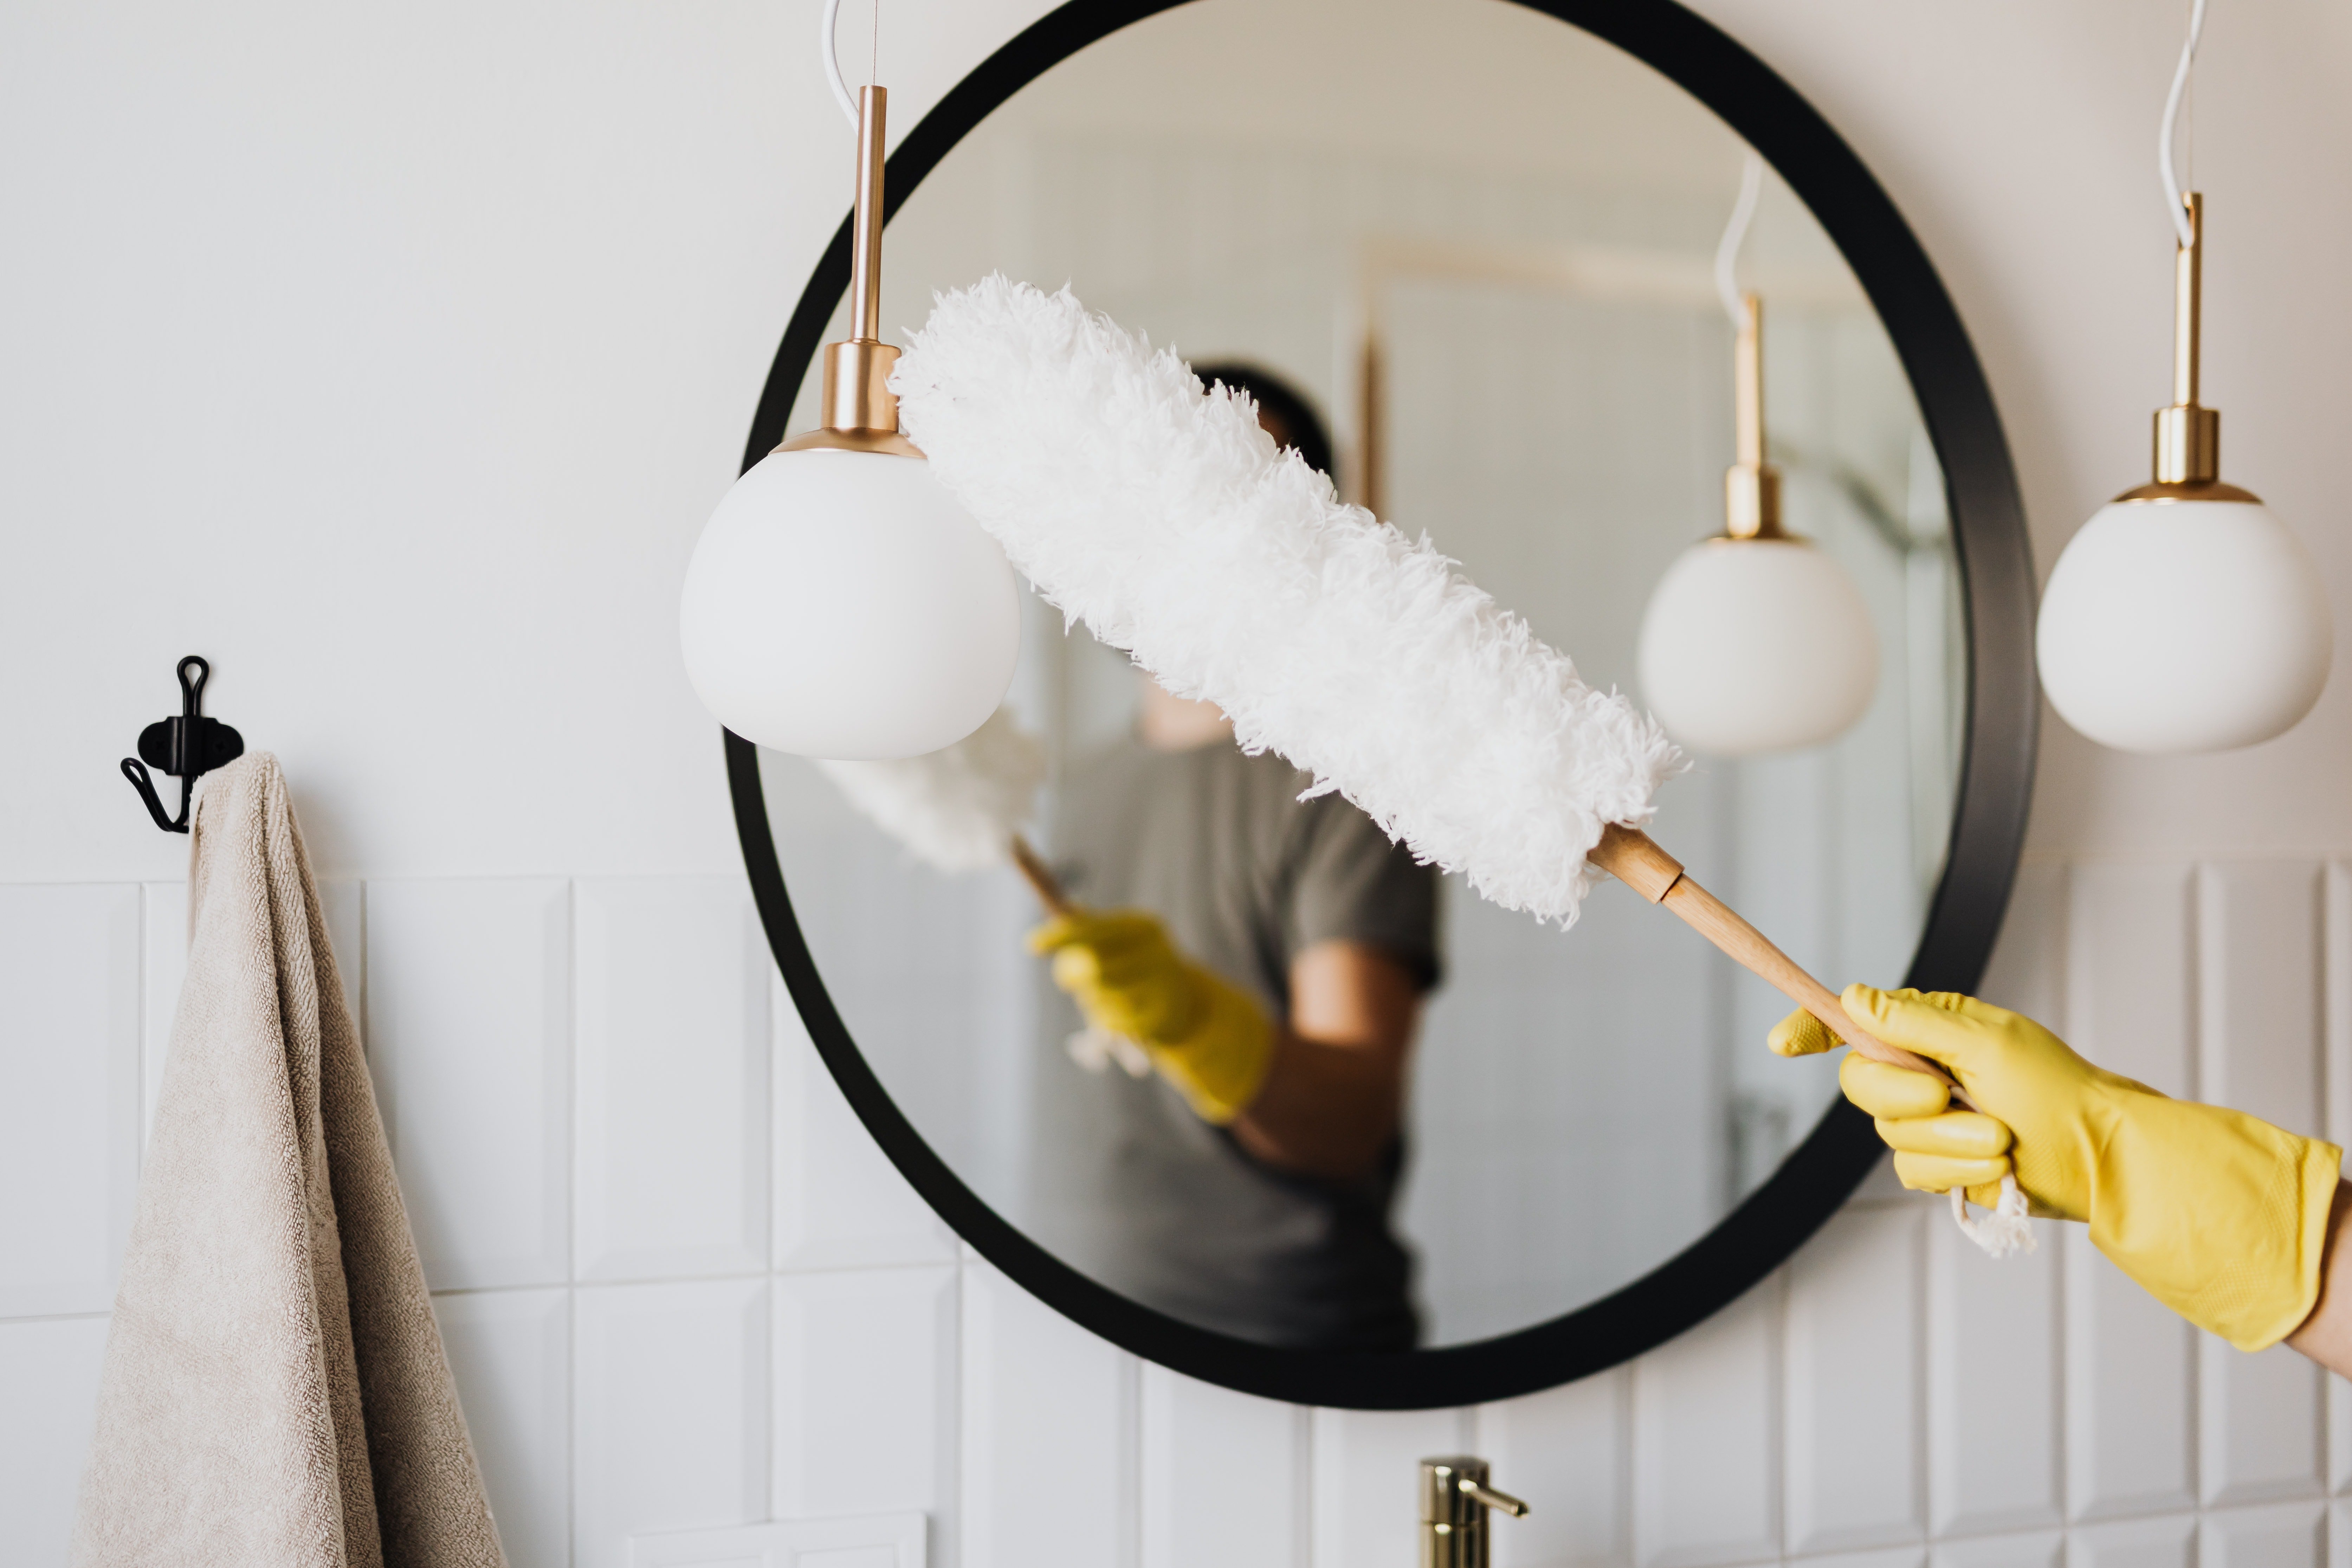 Joan's house cleaning business was very successful, and she started thinking about expanding it to reach new heights | Source: Pexels